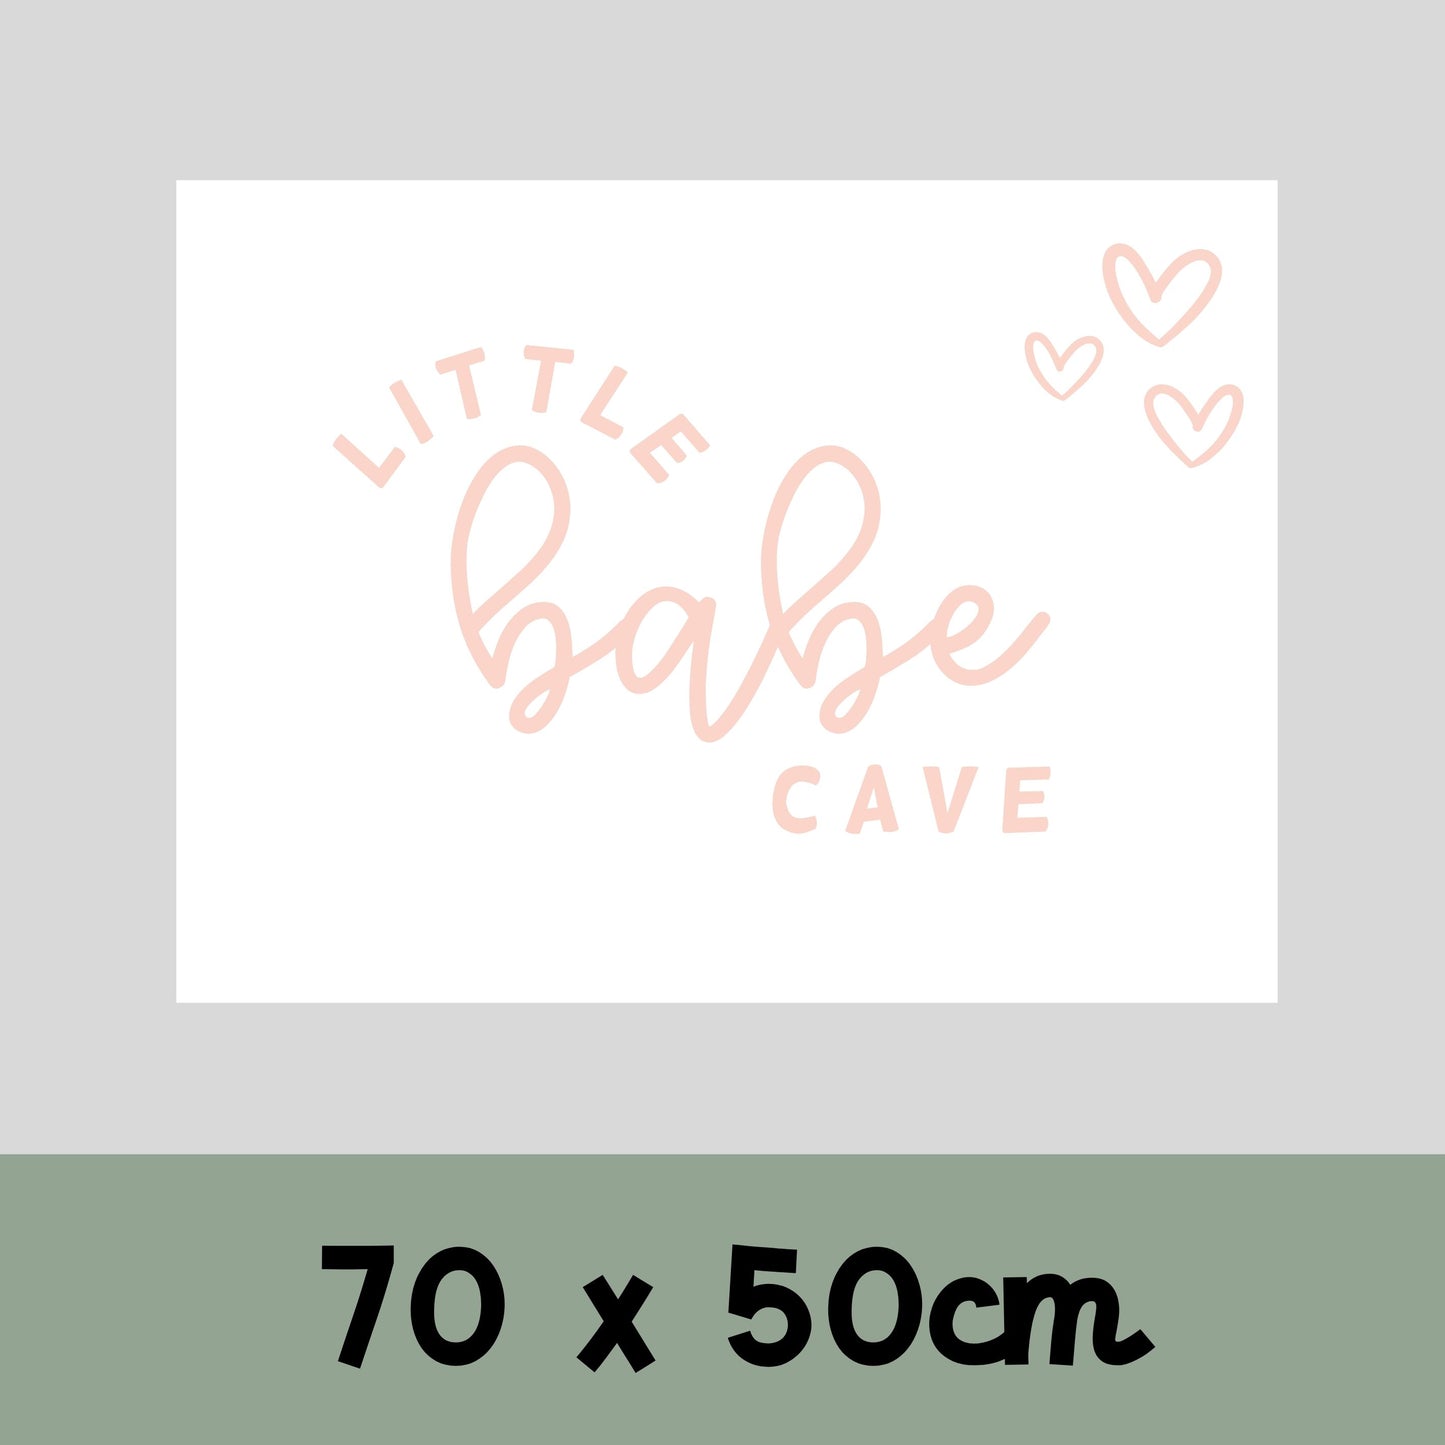 Babe Cave wall flag